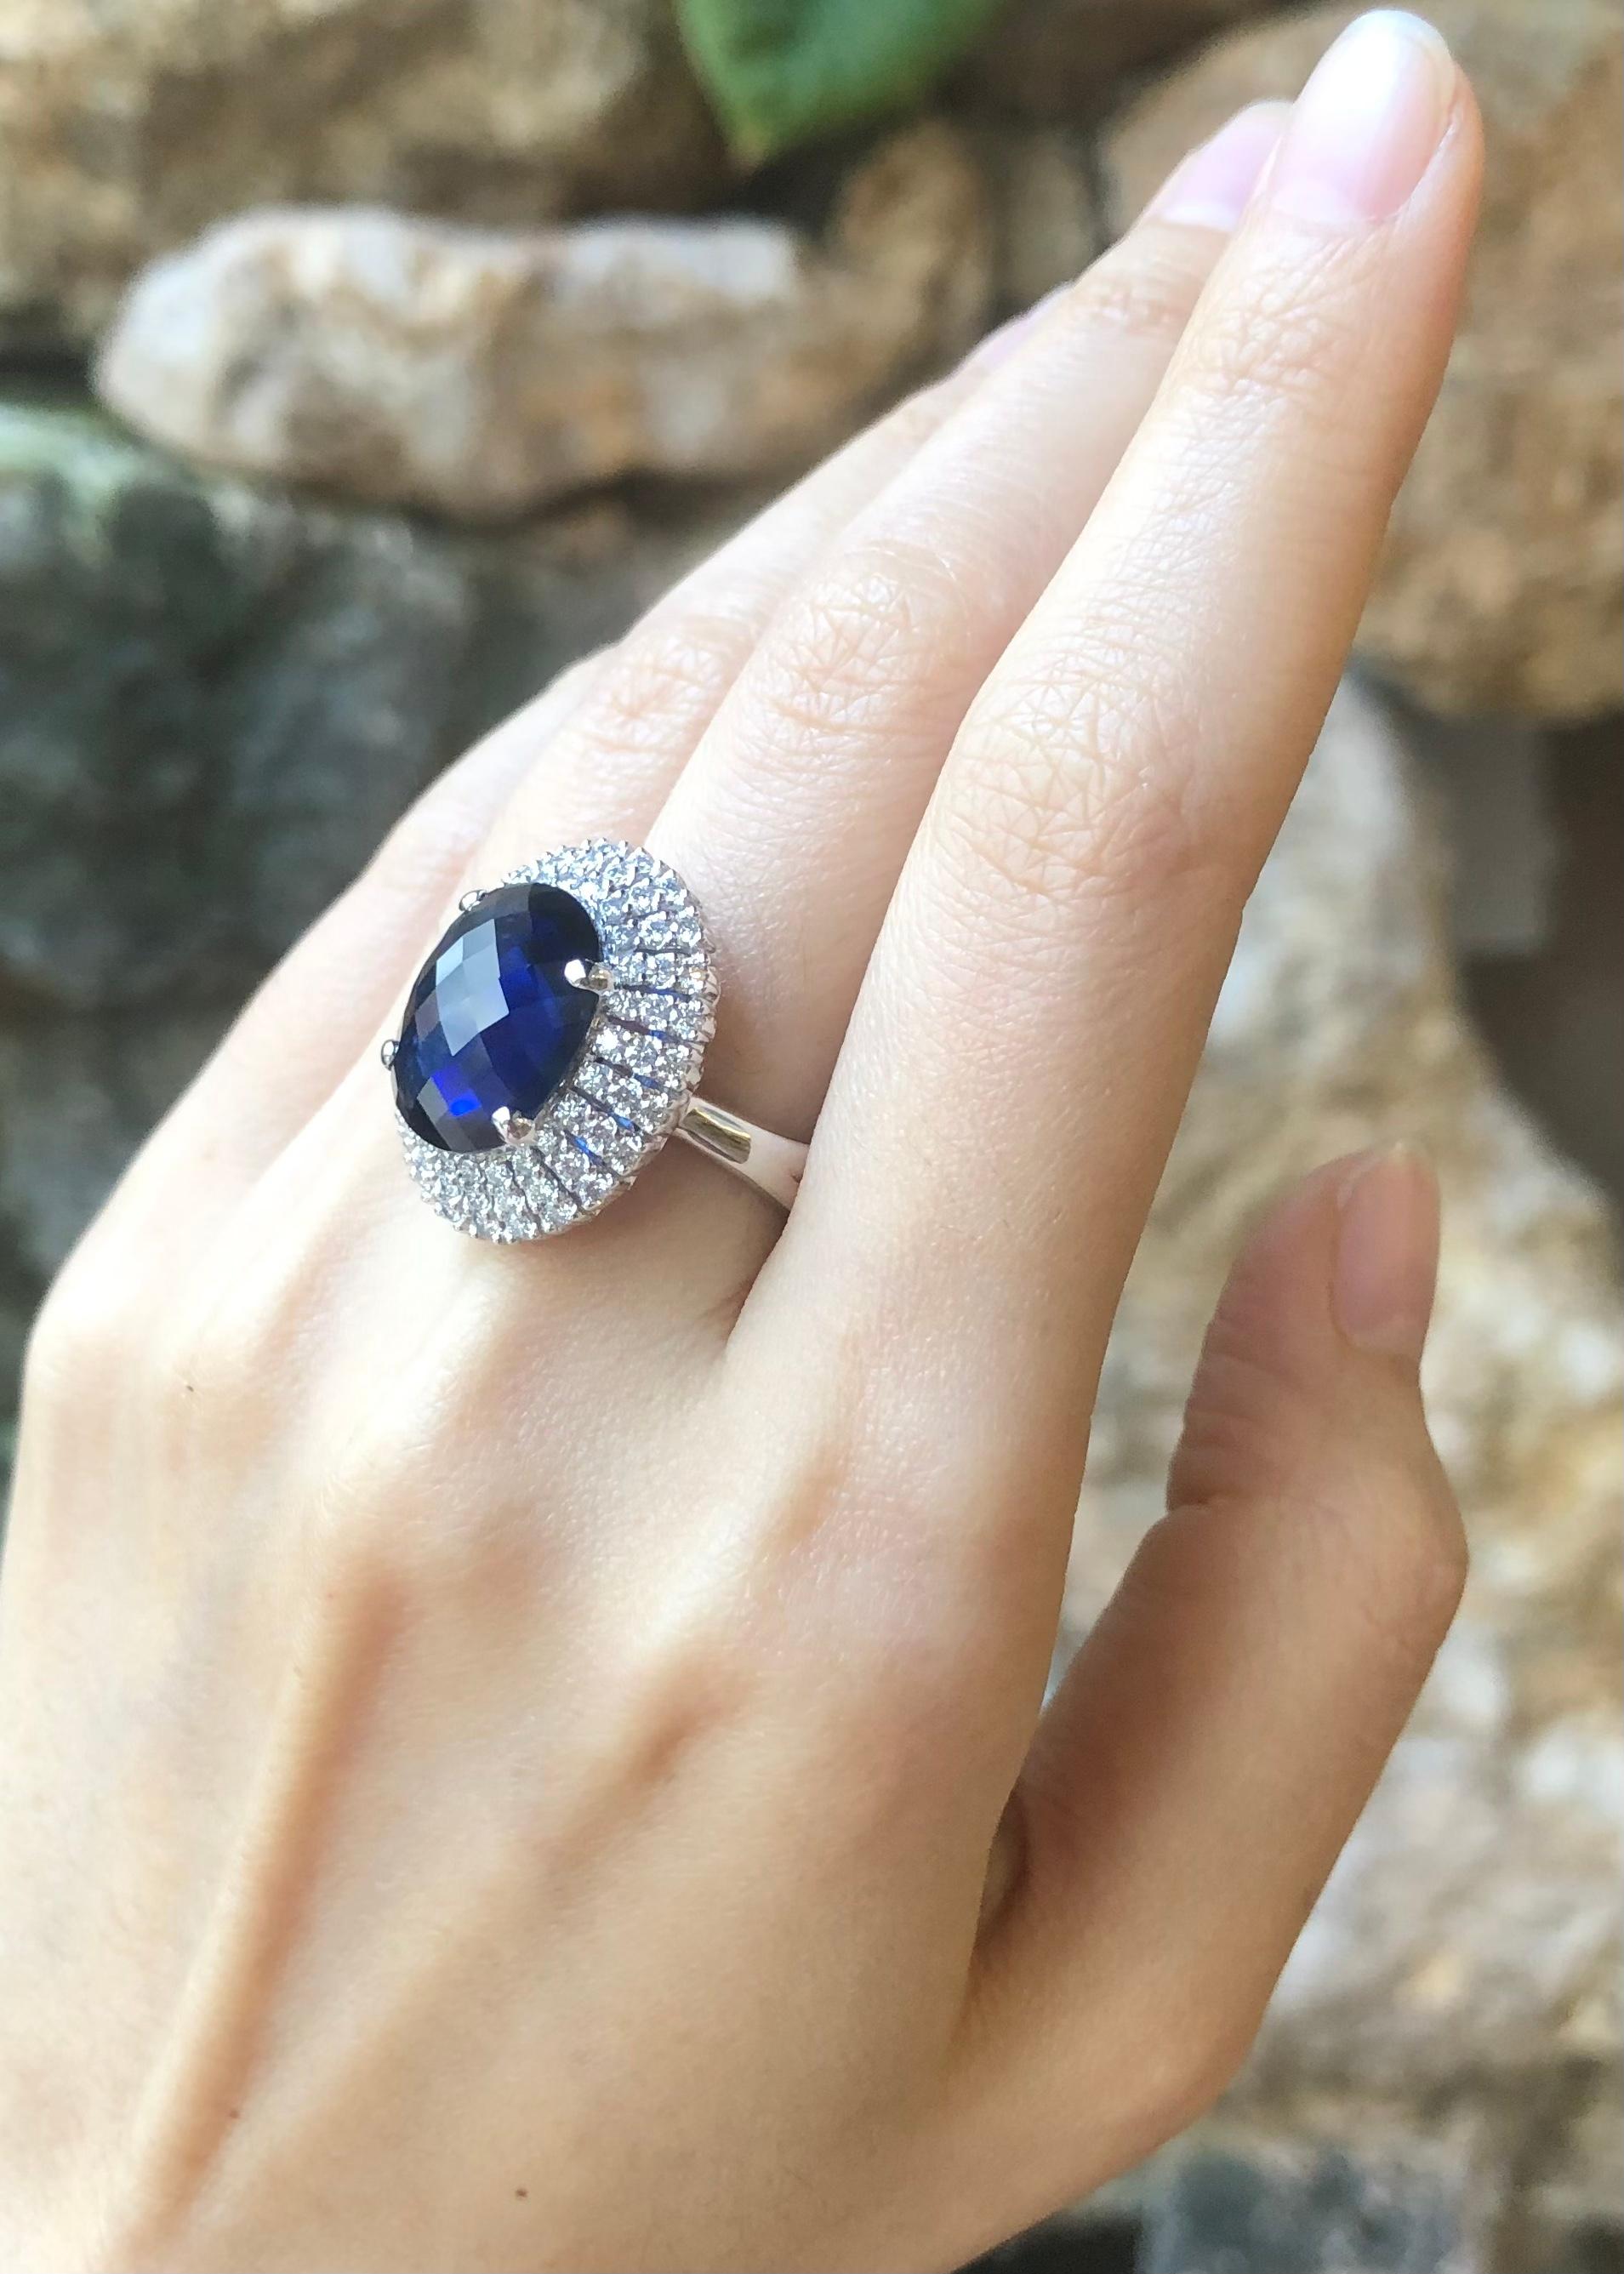 Blue Sapphire 7.80 carats with Diamond 0.91 carat Ring set in 18K White Gold Settings

Width:  1.8 cm 
Length: 2.2 cm
Ring Size: 54
Total Weight: 14.23 grams

